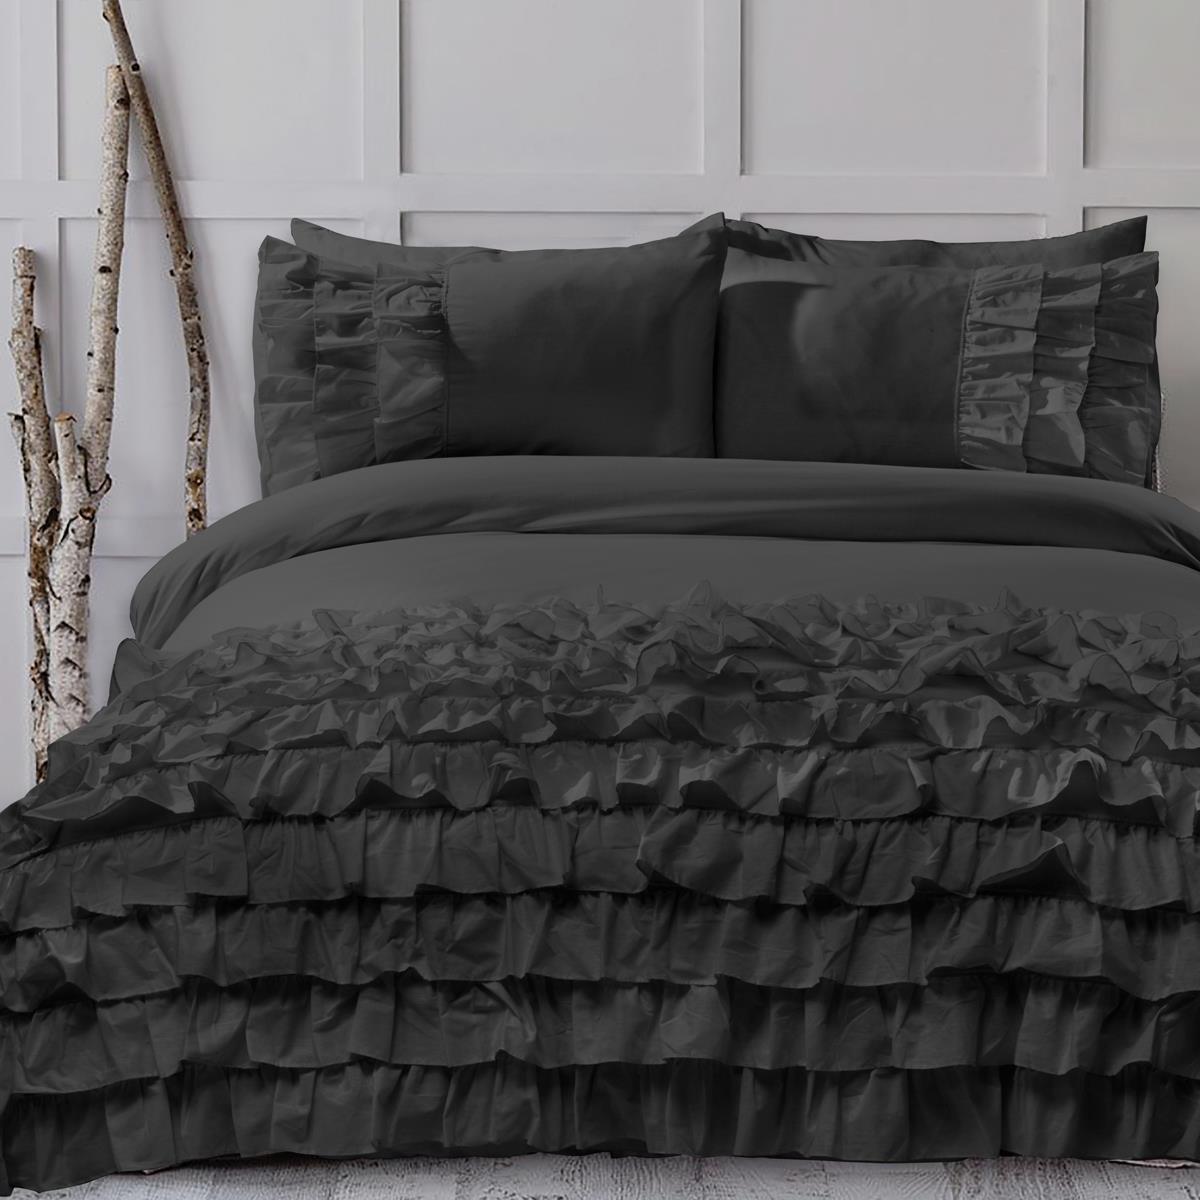 8 Pcs Frilly Black Bed Sheet Set with Quilt, Pillow and Cushions Covers